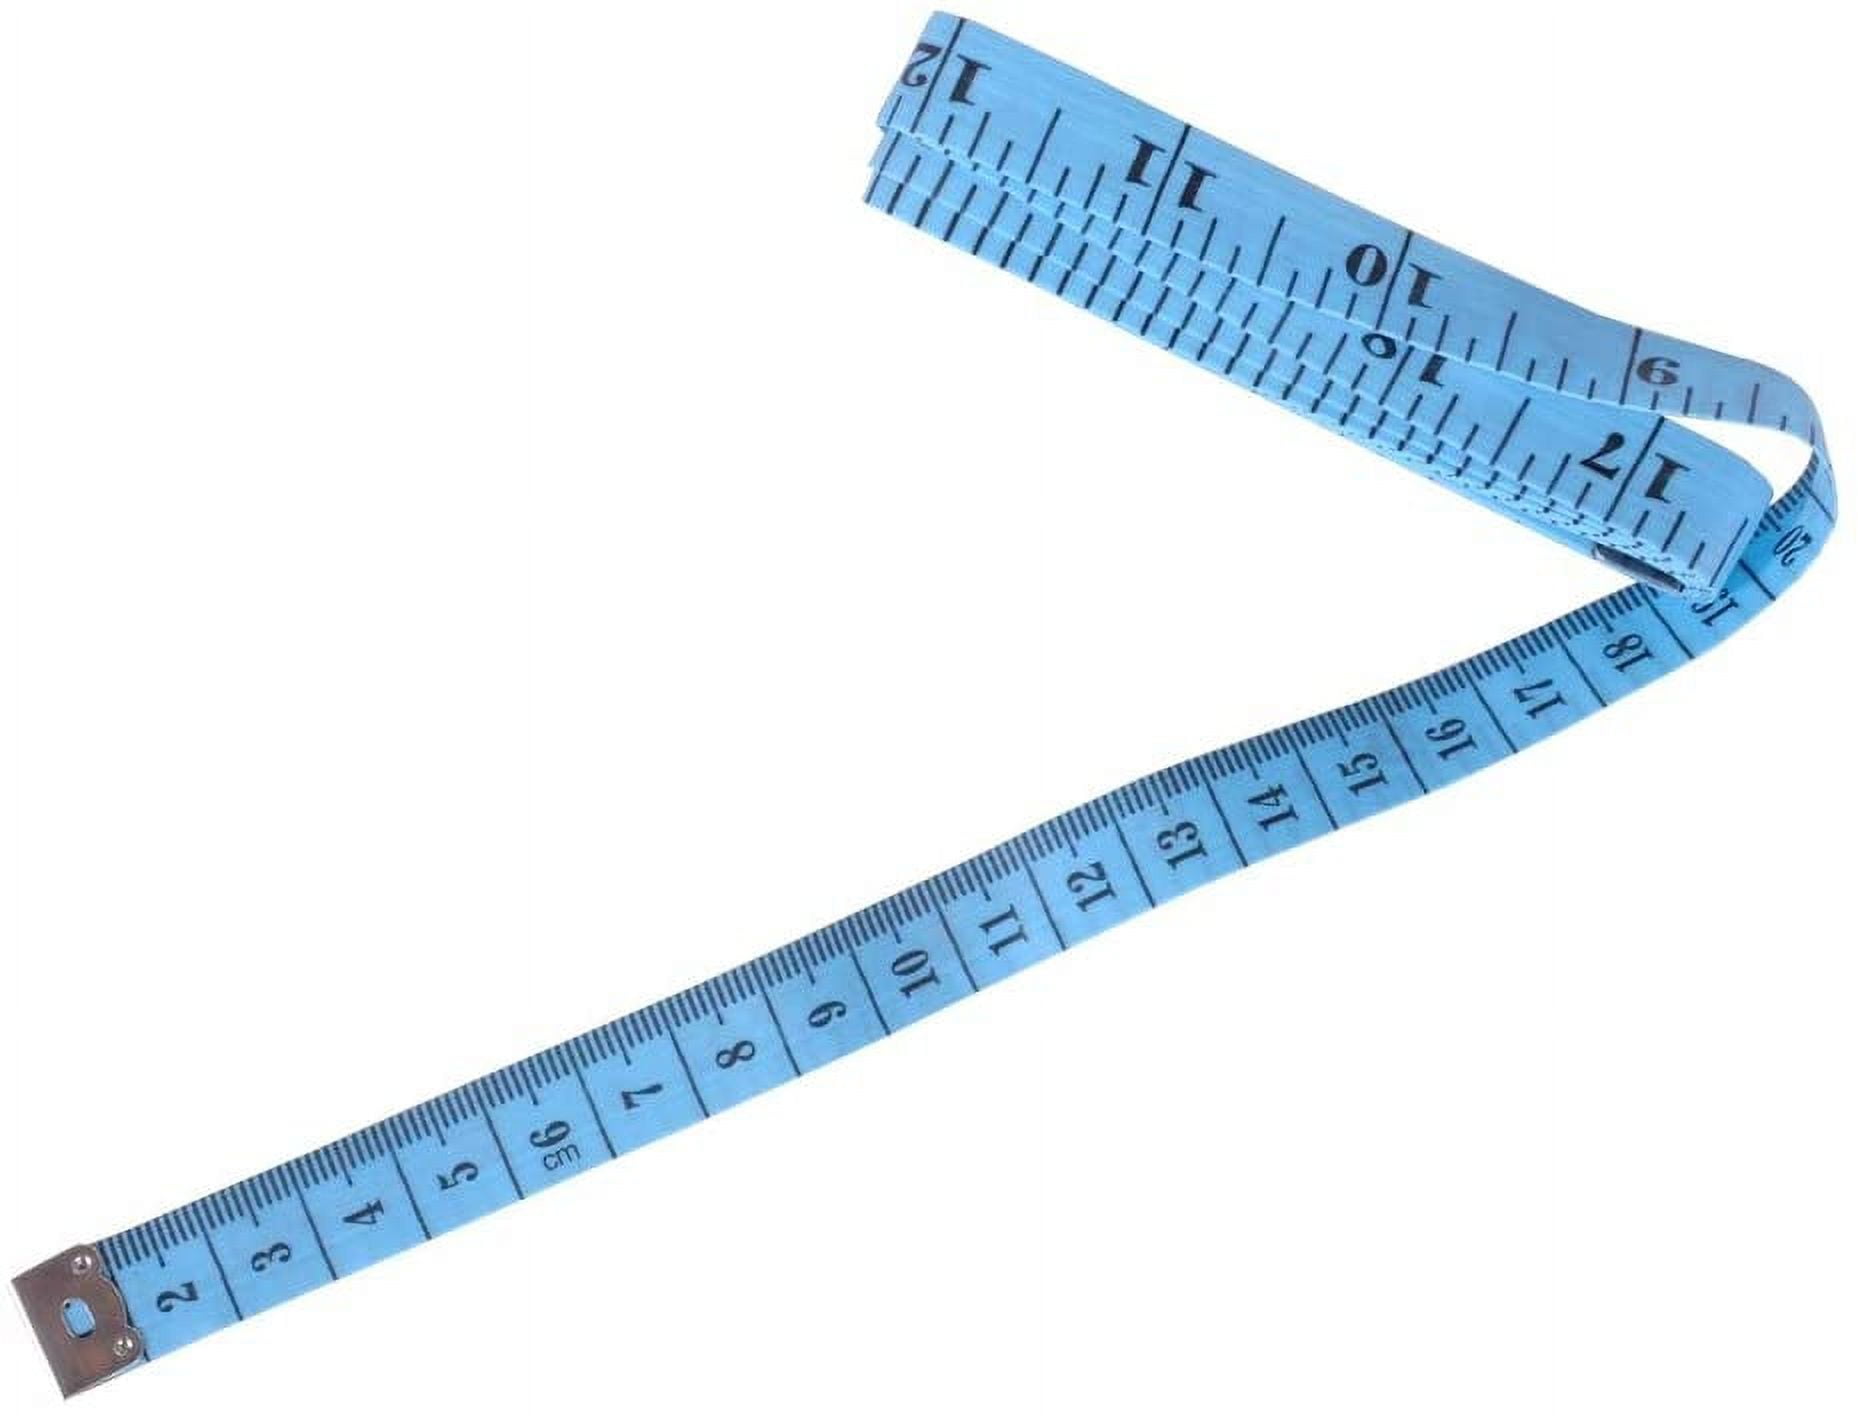  3 PackTape Measure Measuring Tape for Body Fabric Sewing Tailor  Cloth Knitting Home Craft Measurements,60-inch/150-cm Soft Multicolor Tape  Measure Body Measuring Tape Set with Snap Button Closure : Arts, Crafts 